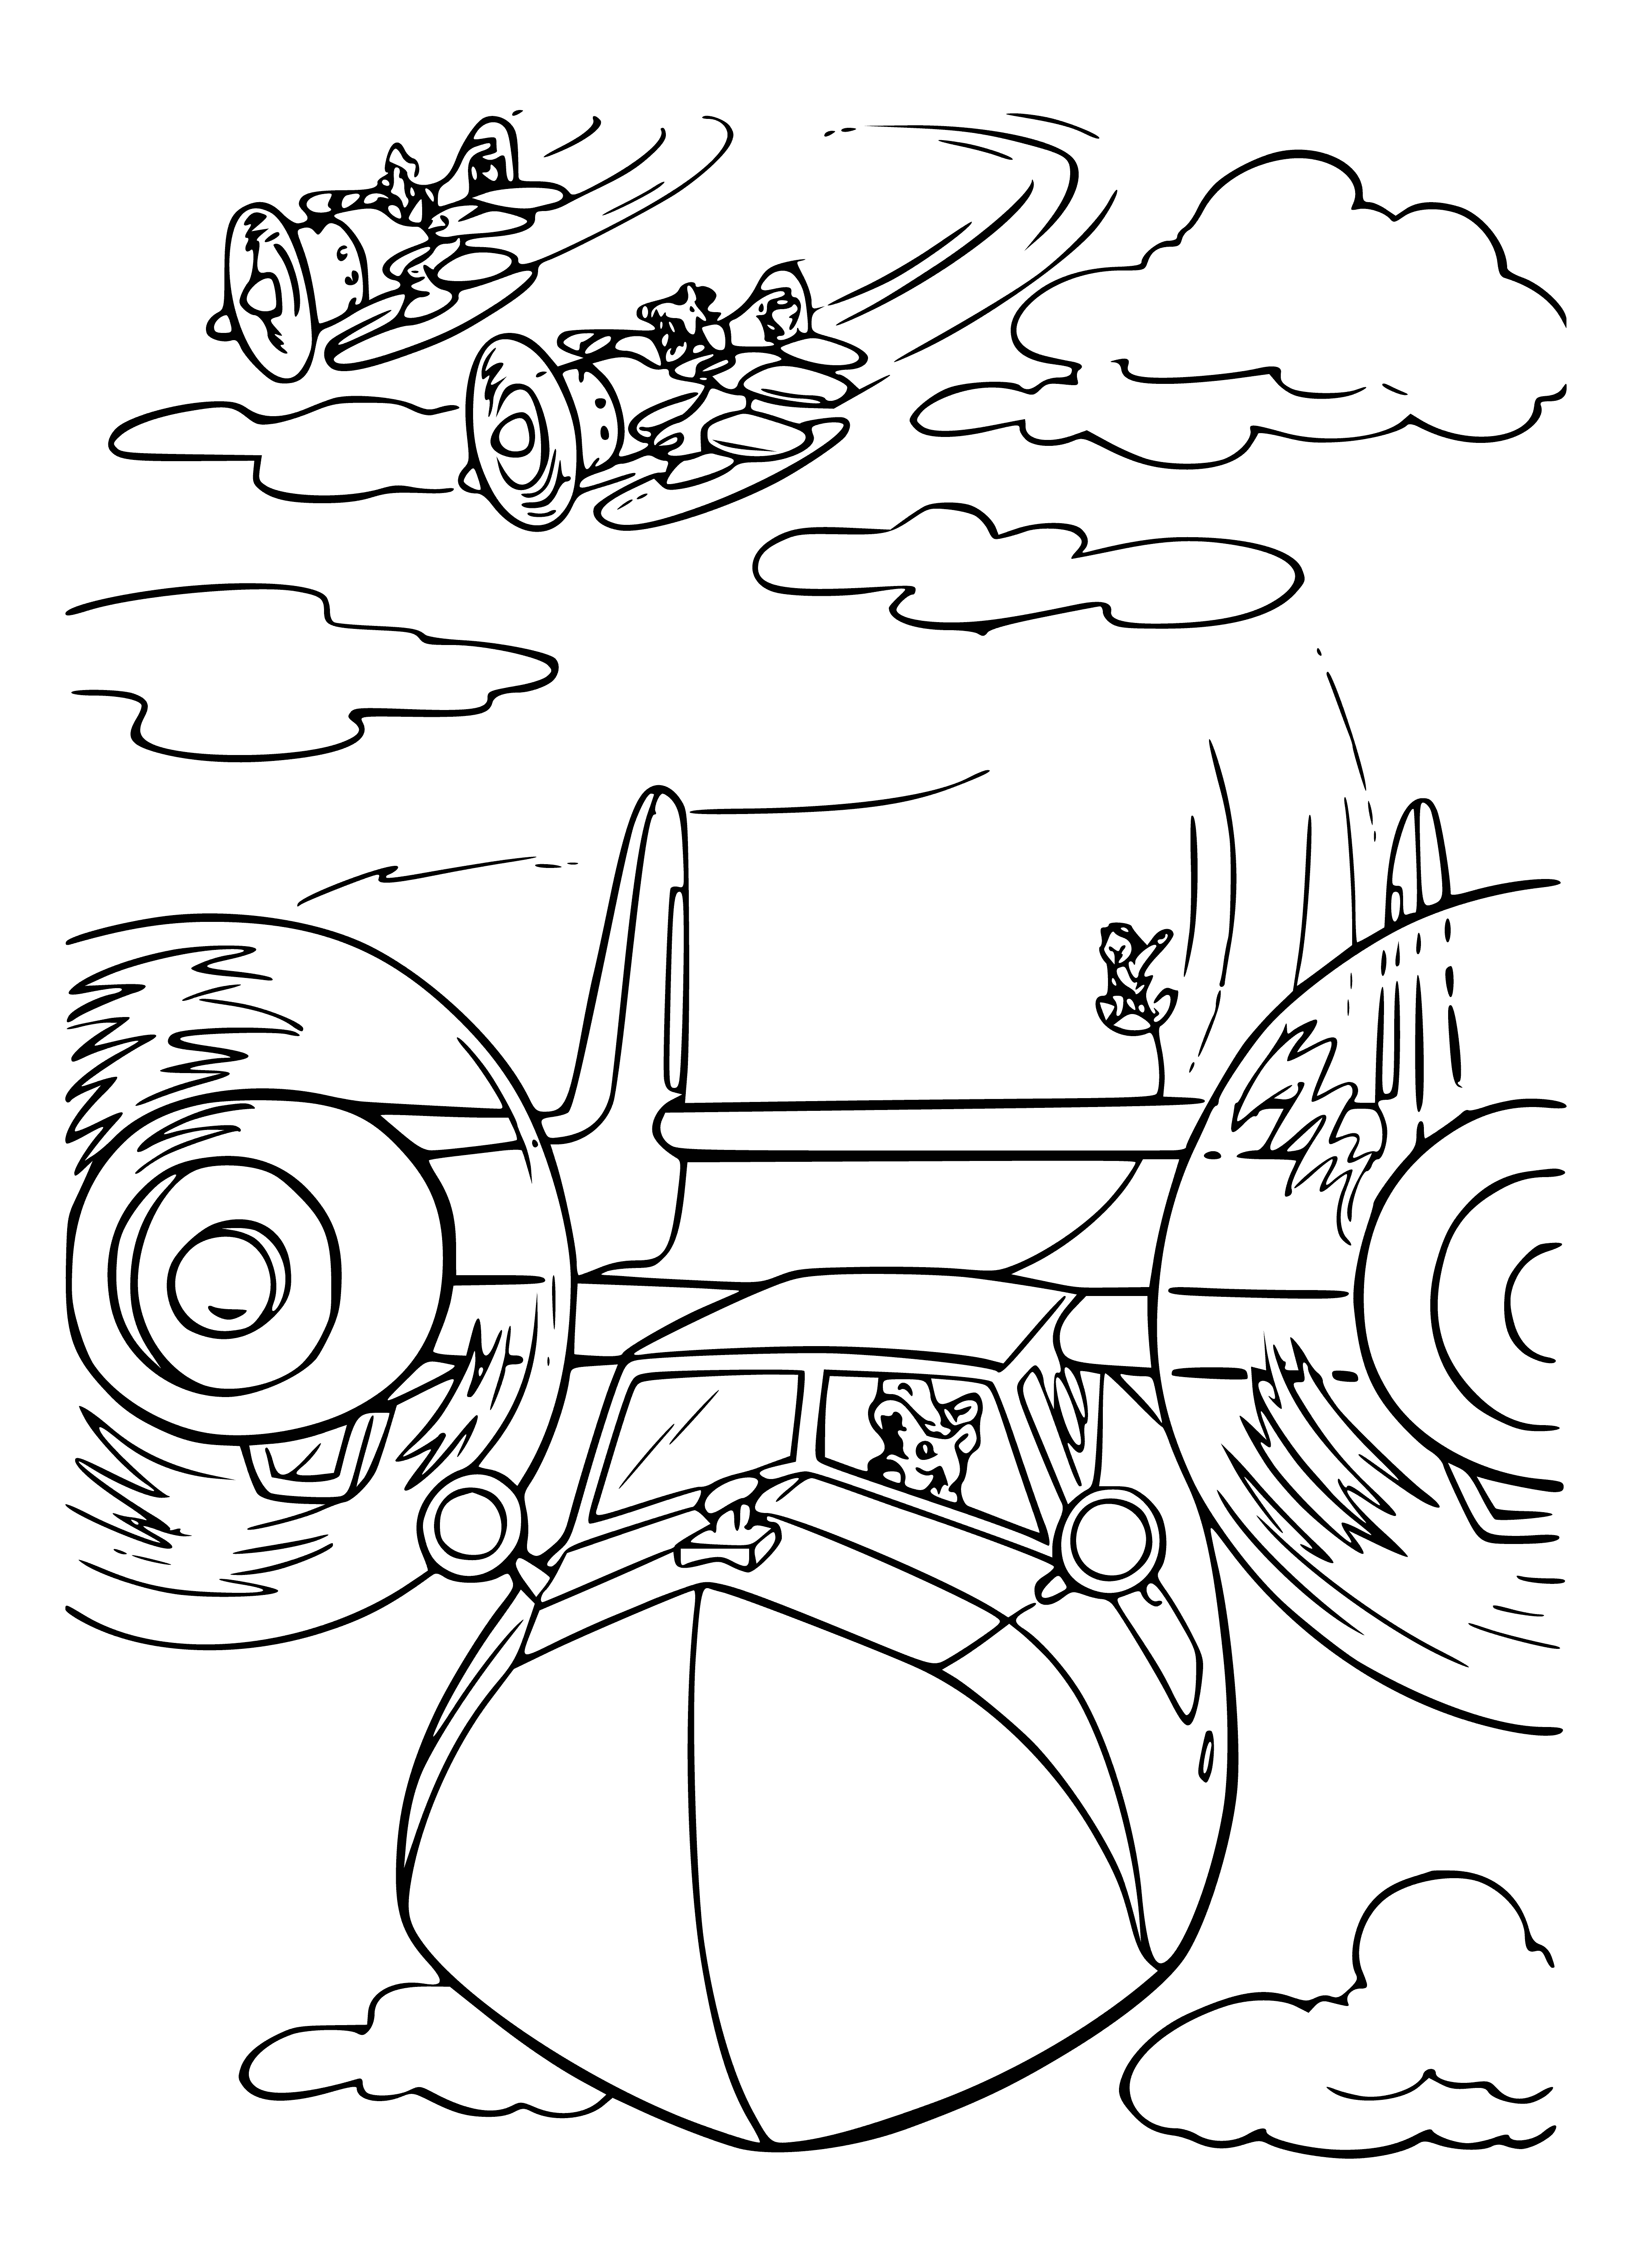 Pirates are catching up coloring page